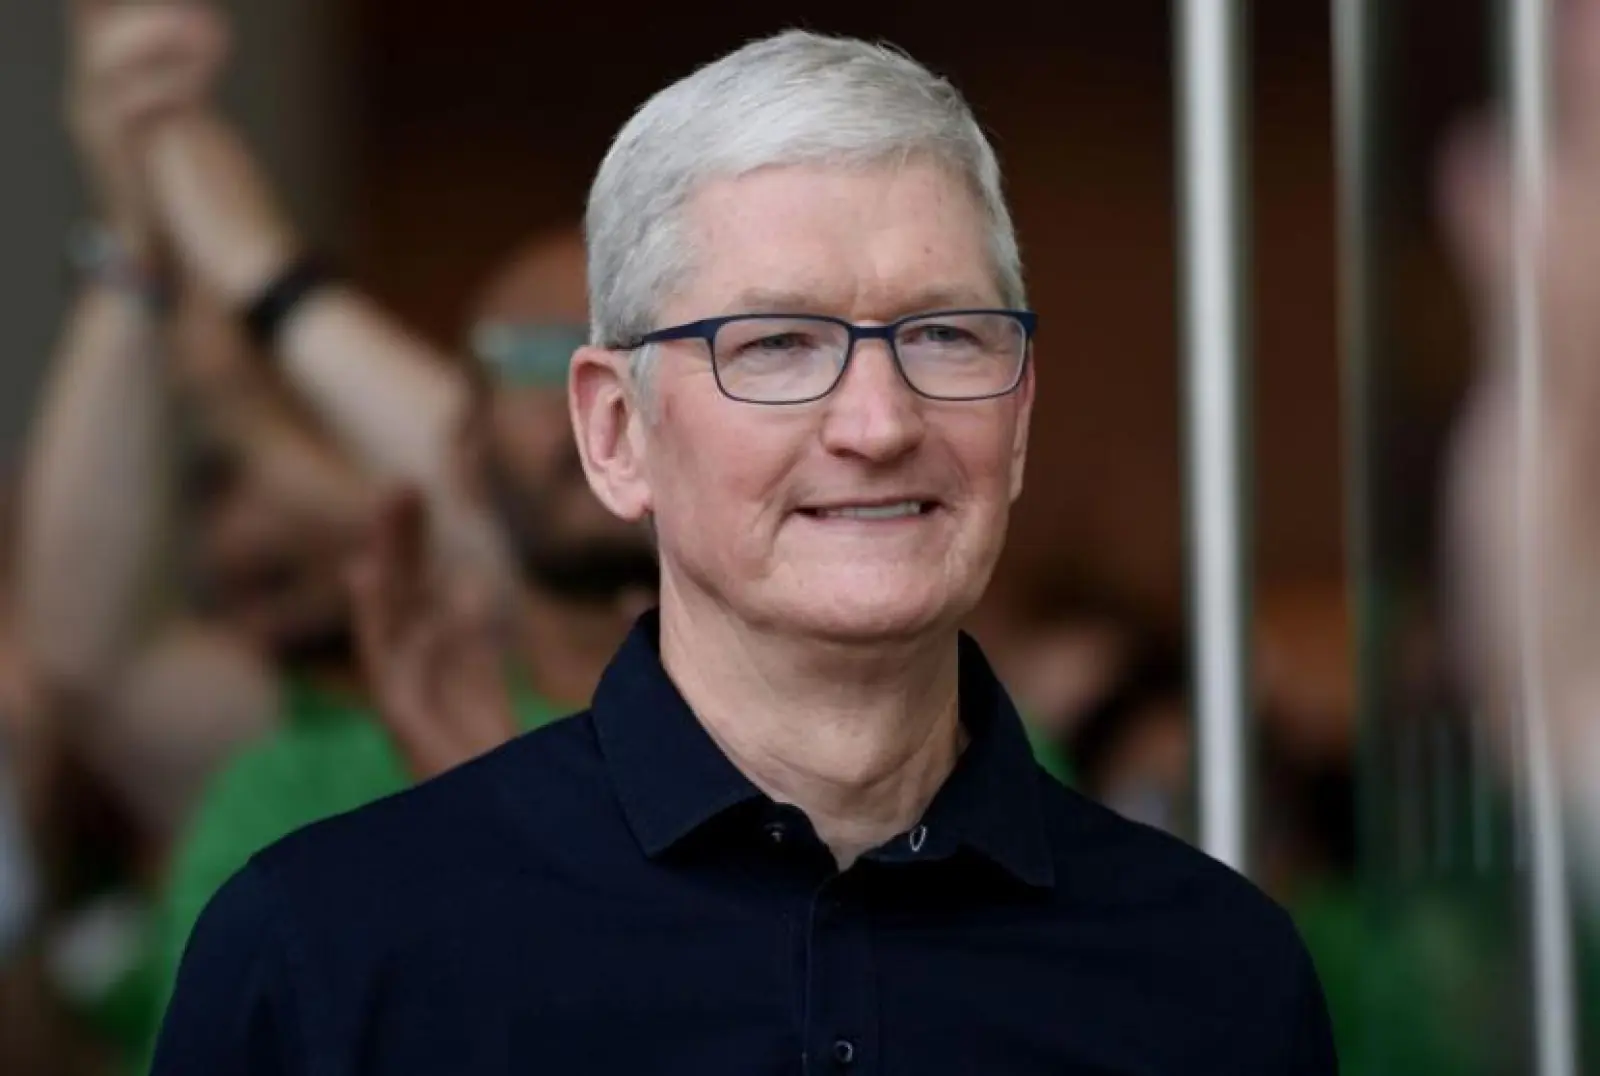 'India is the most preferred market for tech giants', says Apple CEO Cook